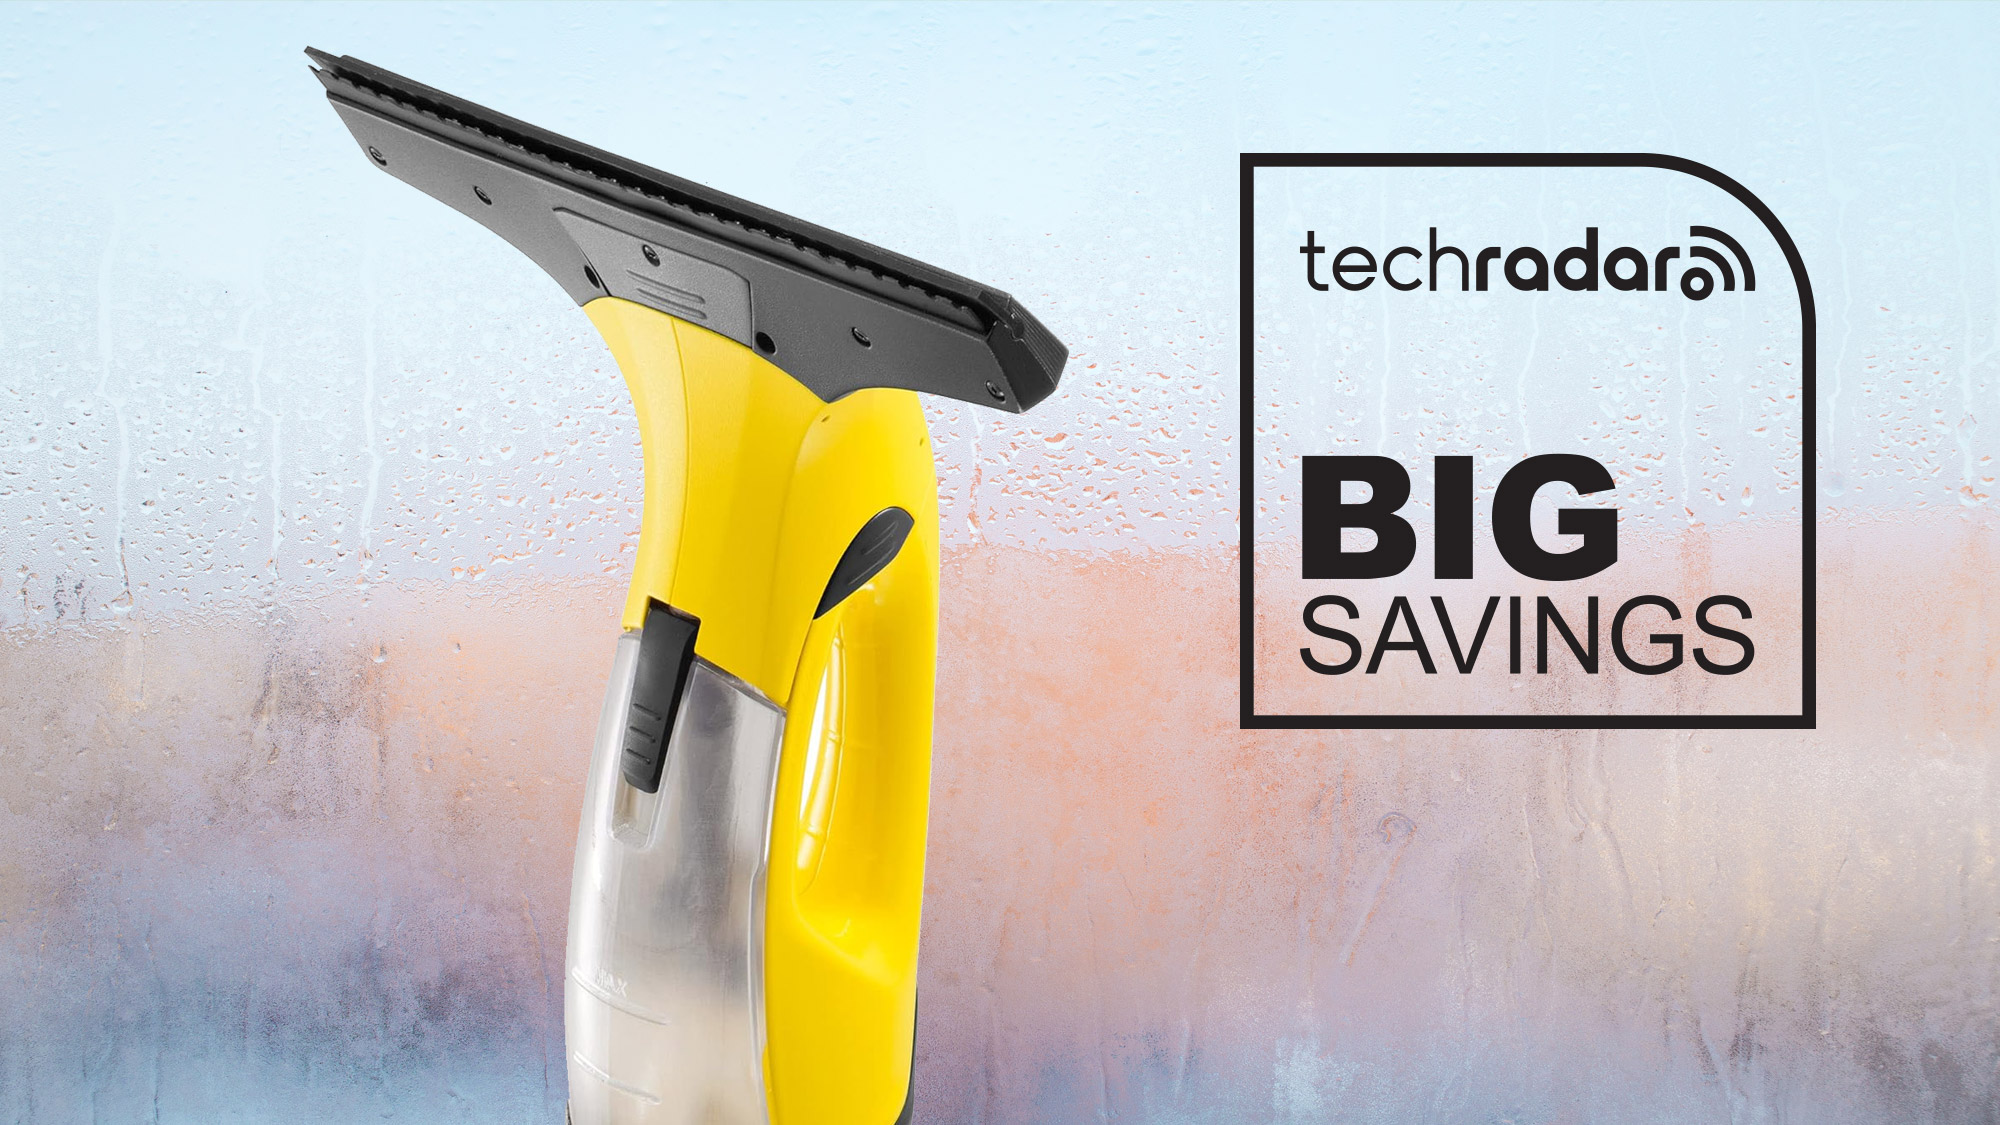 This Karcher window vac will keep your windows dry all winter, and it's 48%  off for Black Friday